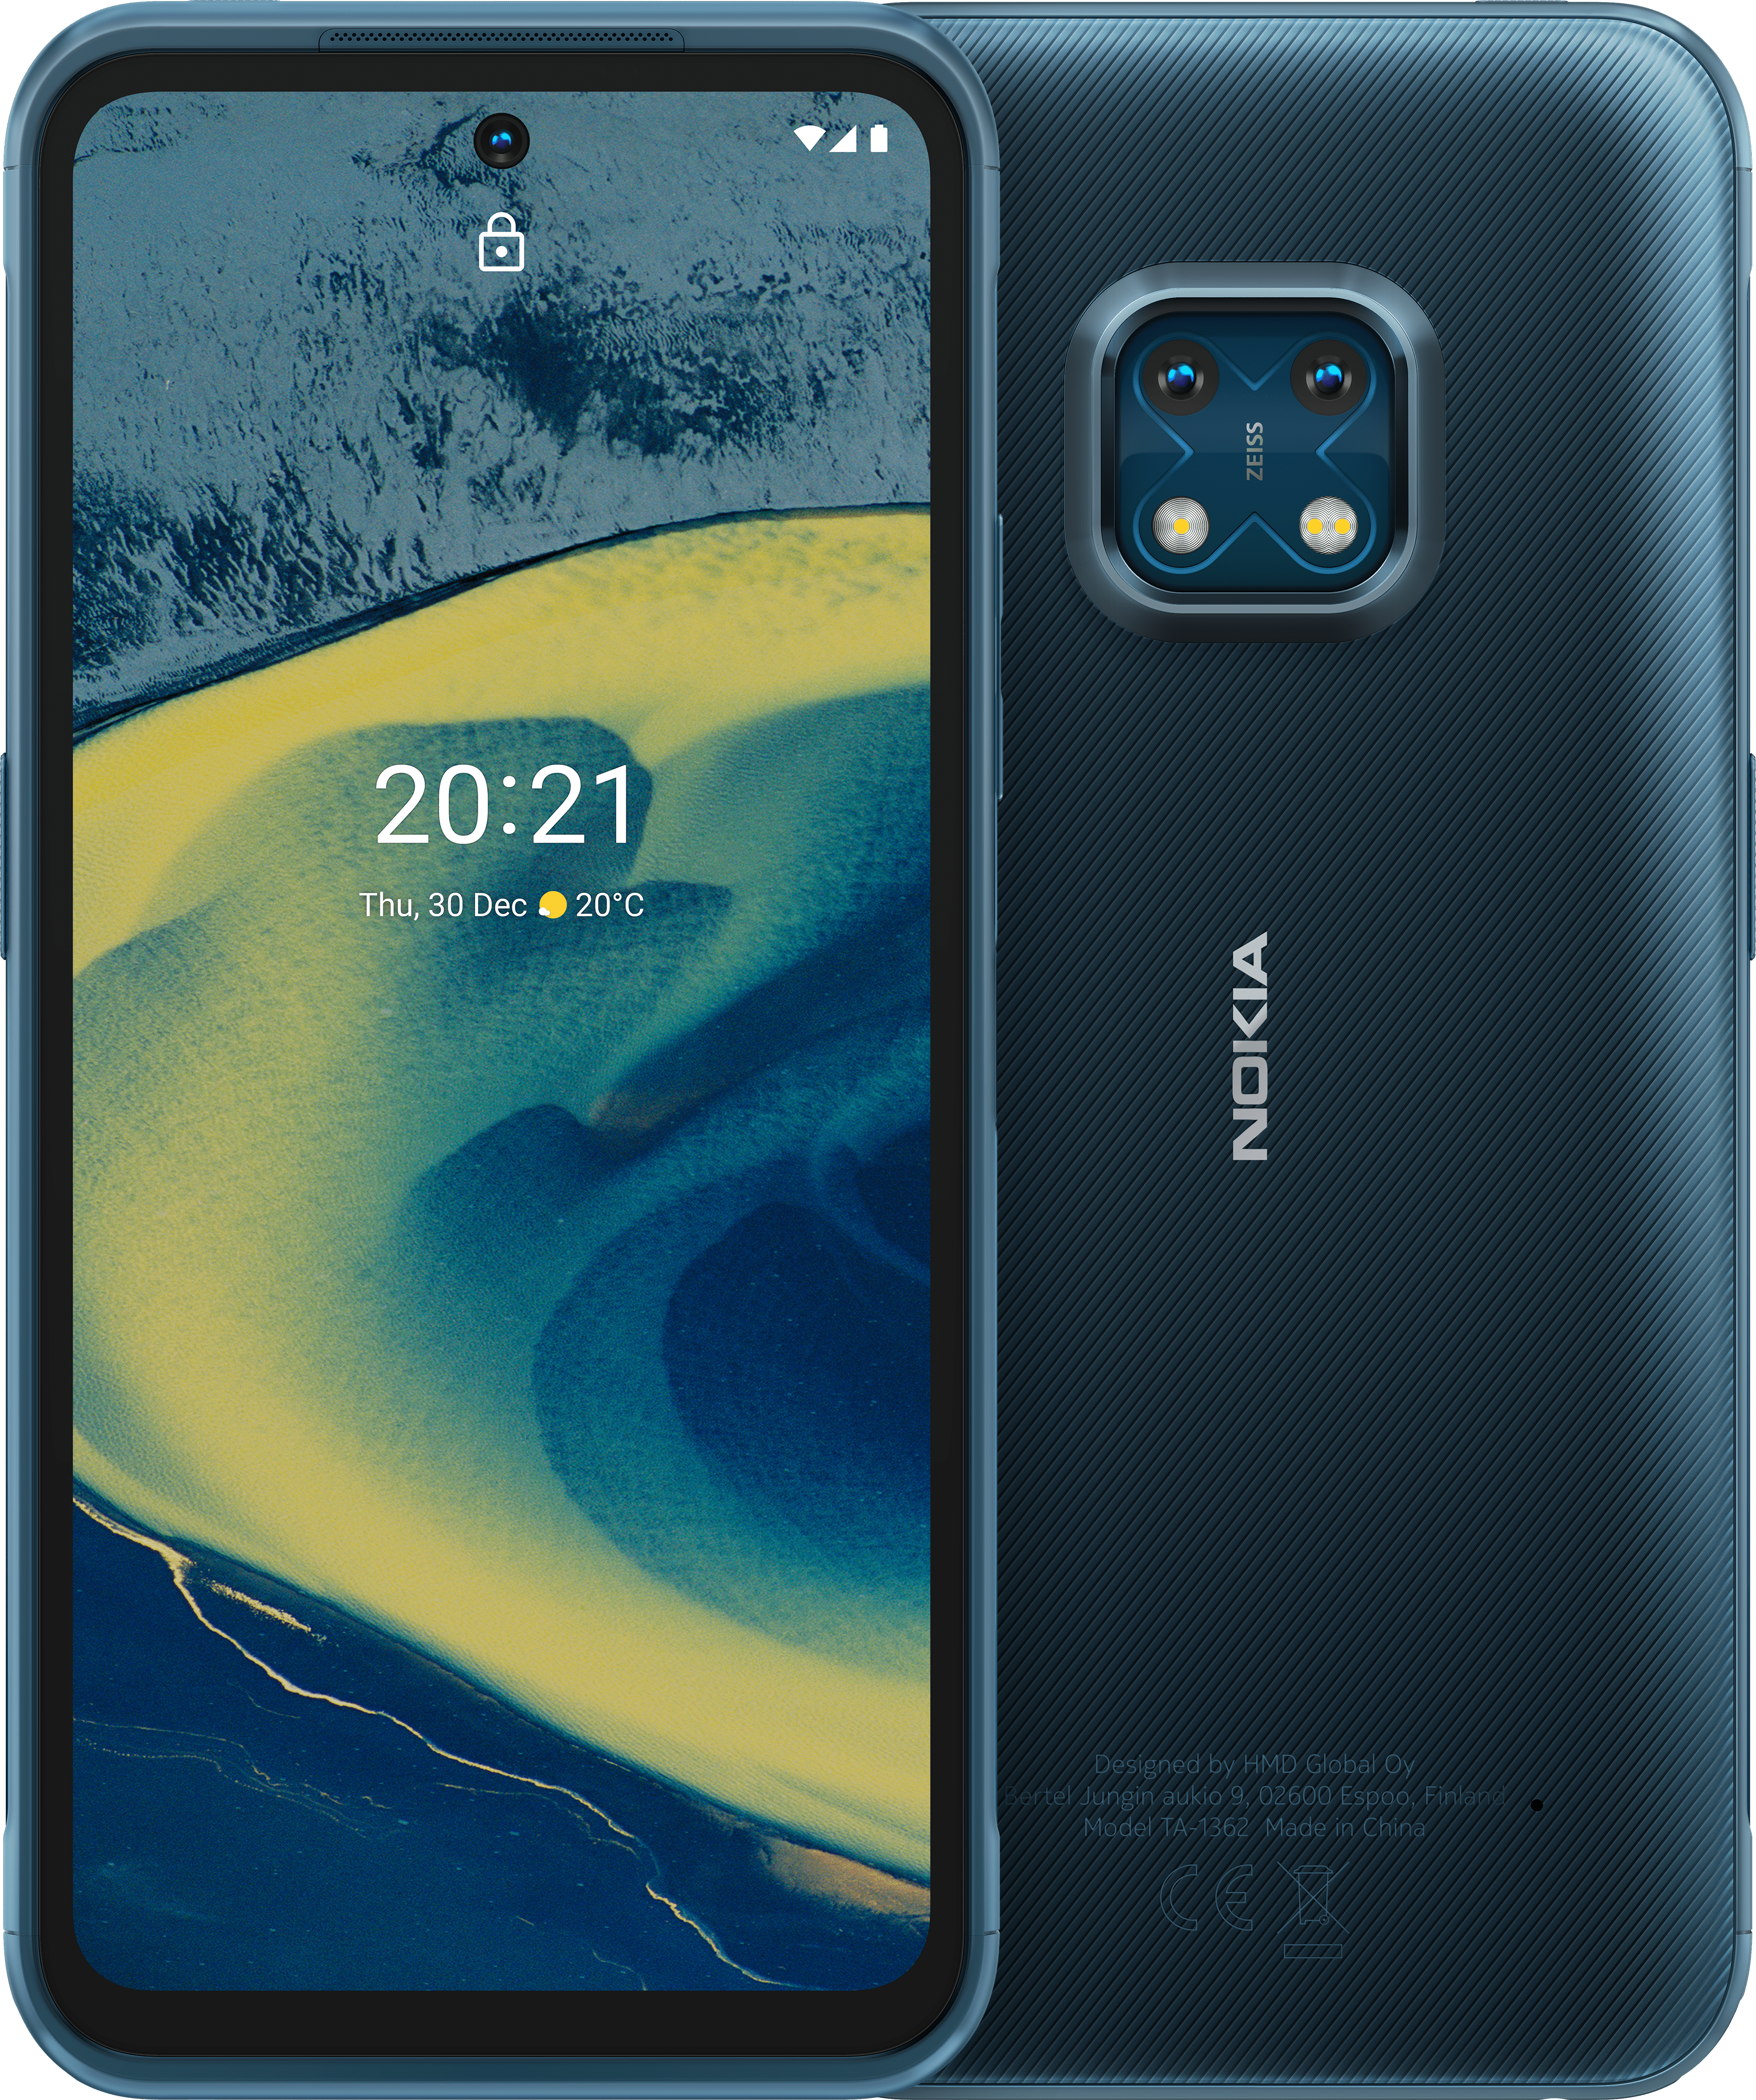 Latest Nokia Phones Our Best Android Phones 2021